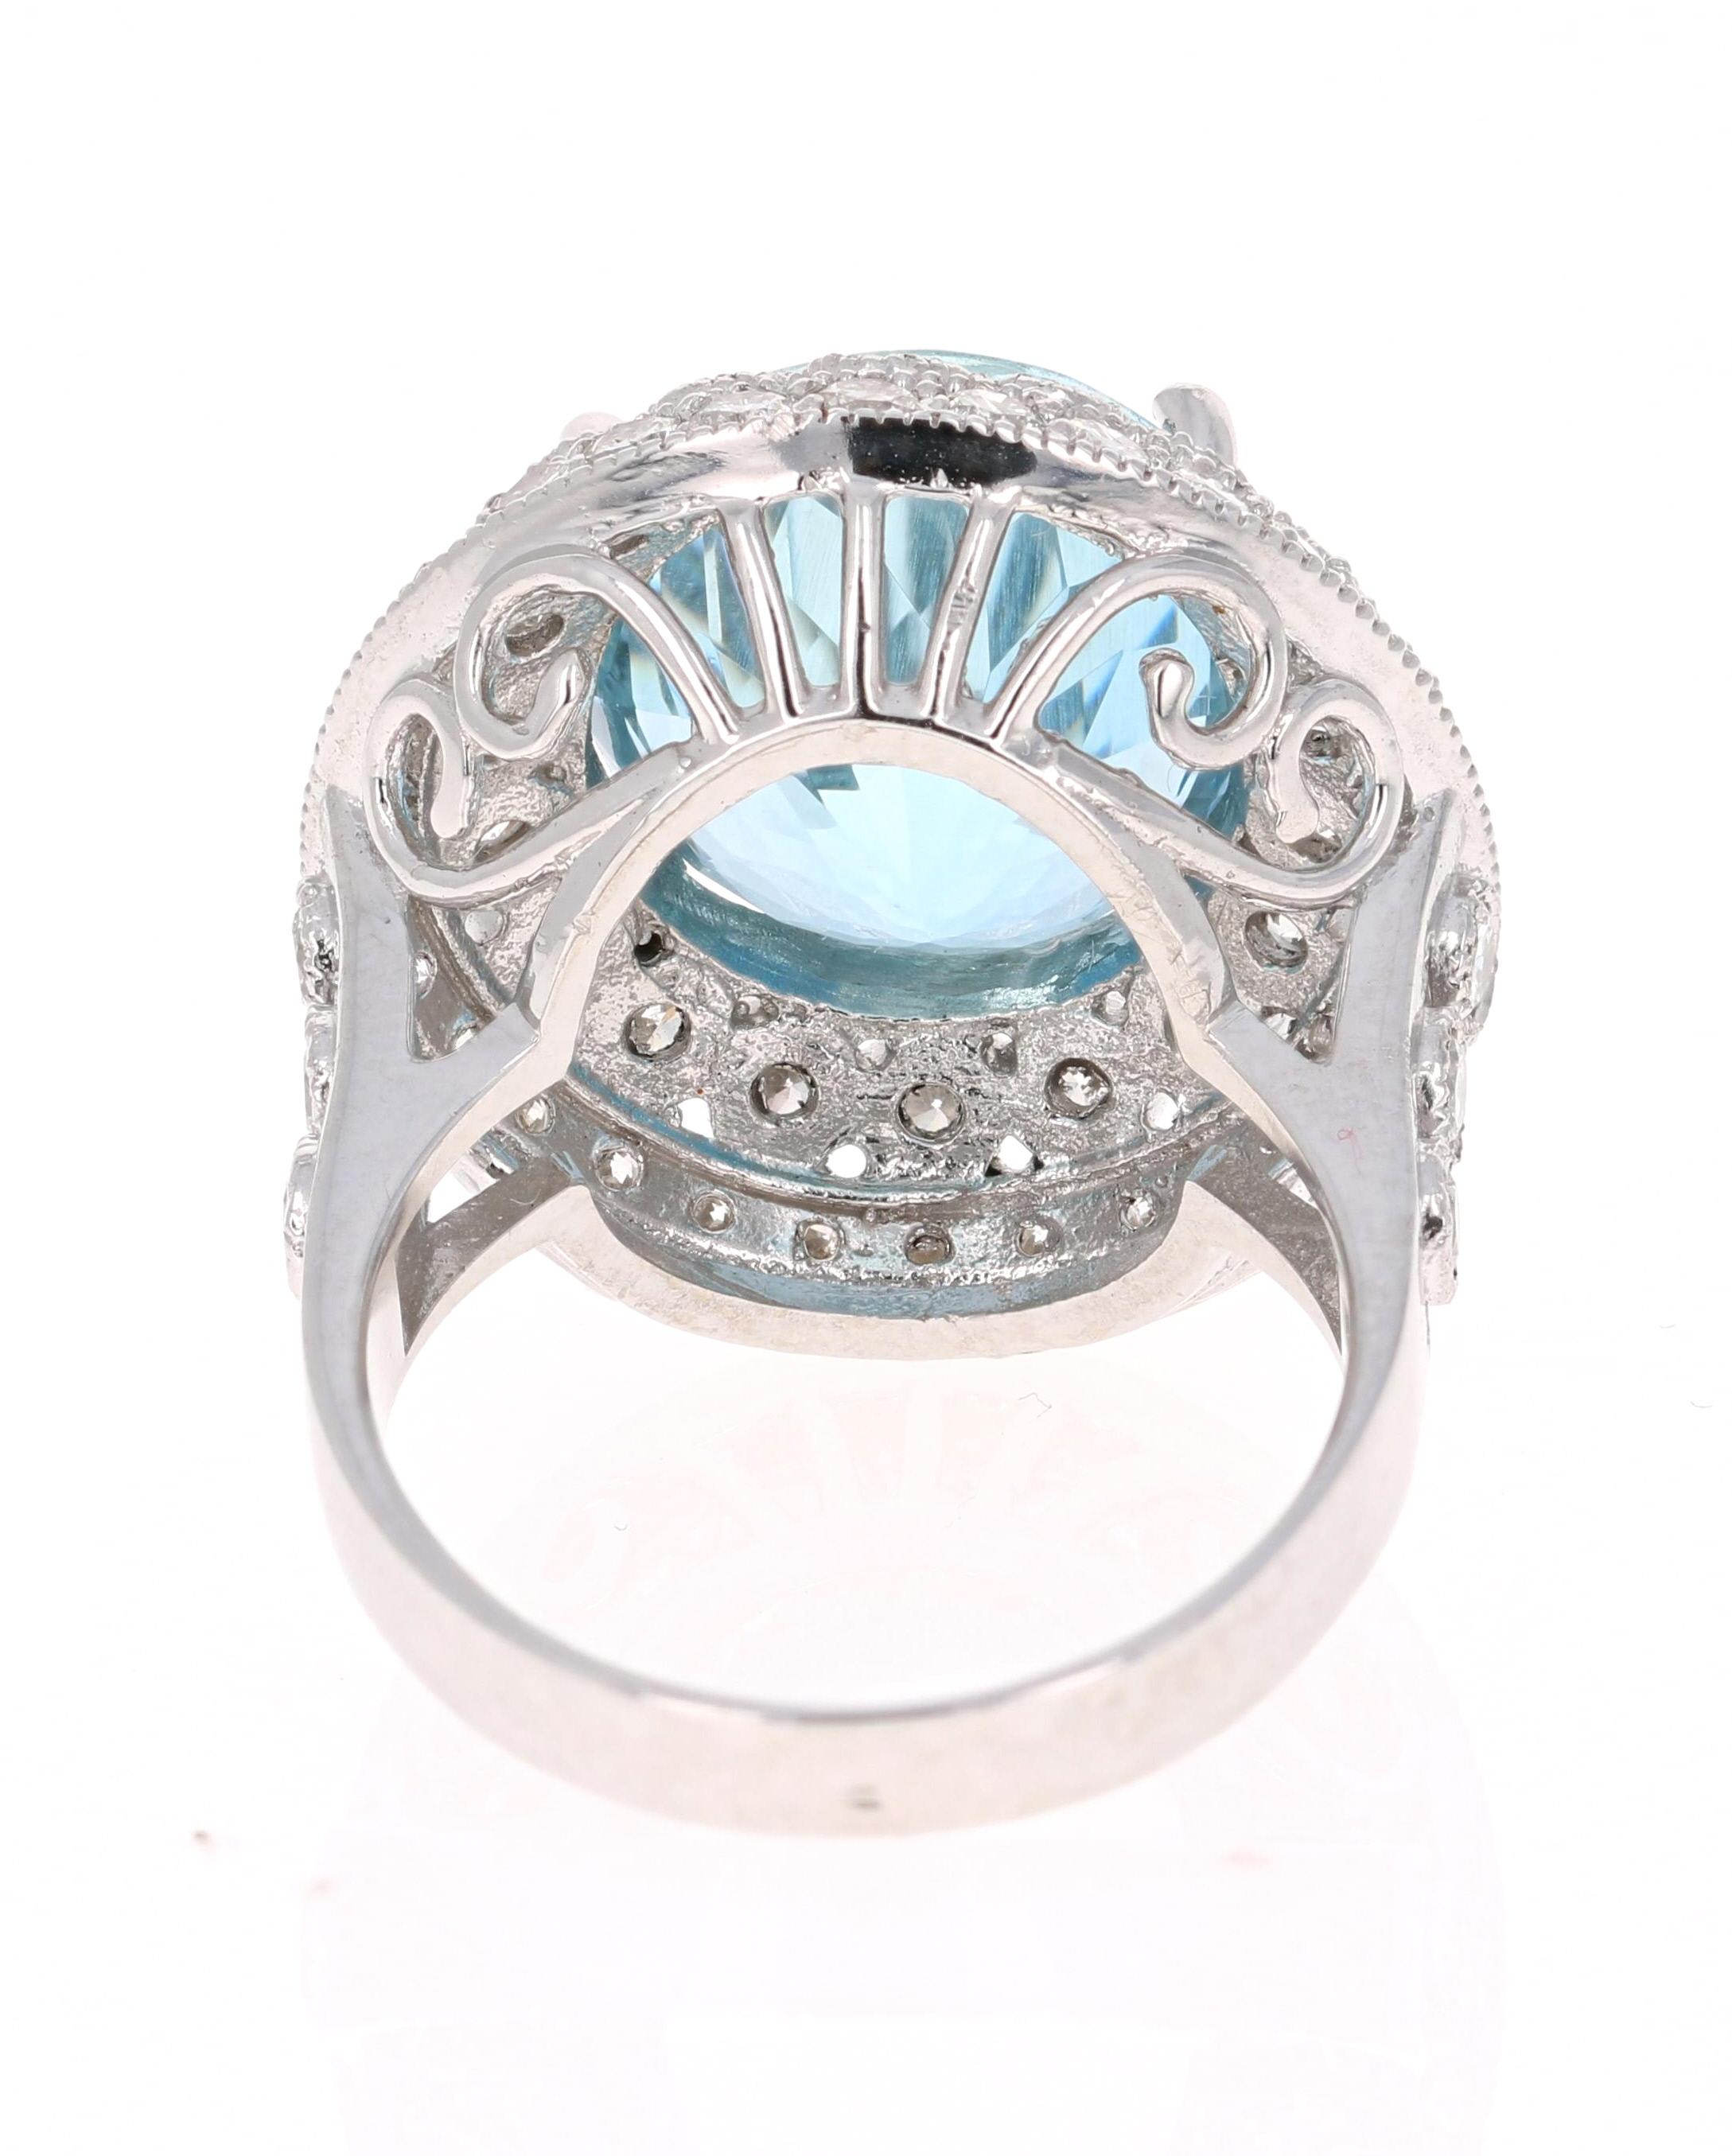 Oval Cut 10.97 Carat Aquamarine Diamond White Gold Cocktail Ring For Sale